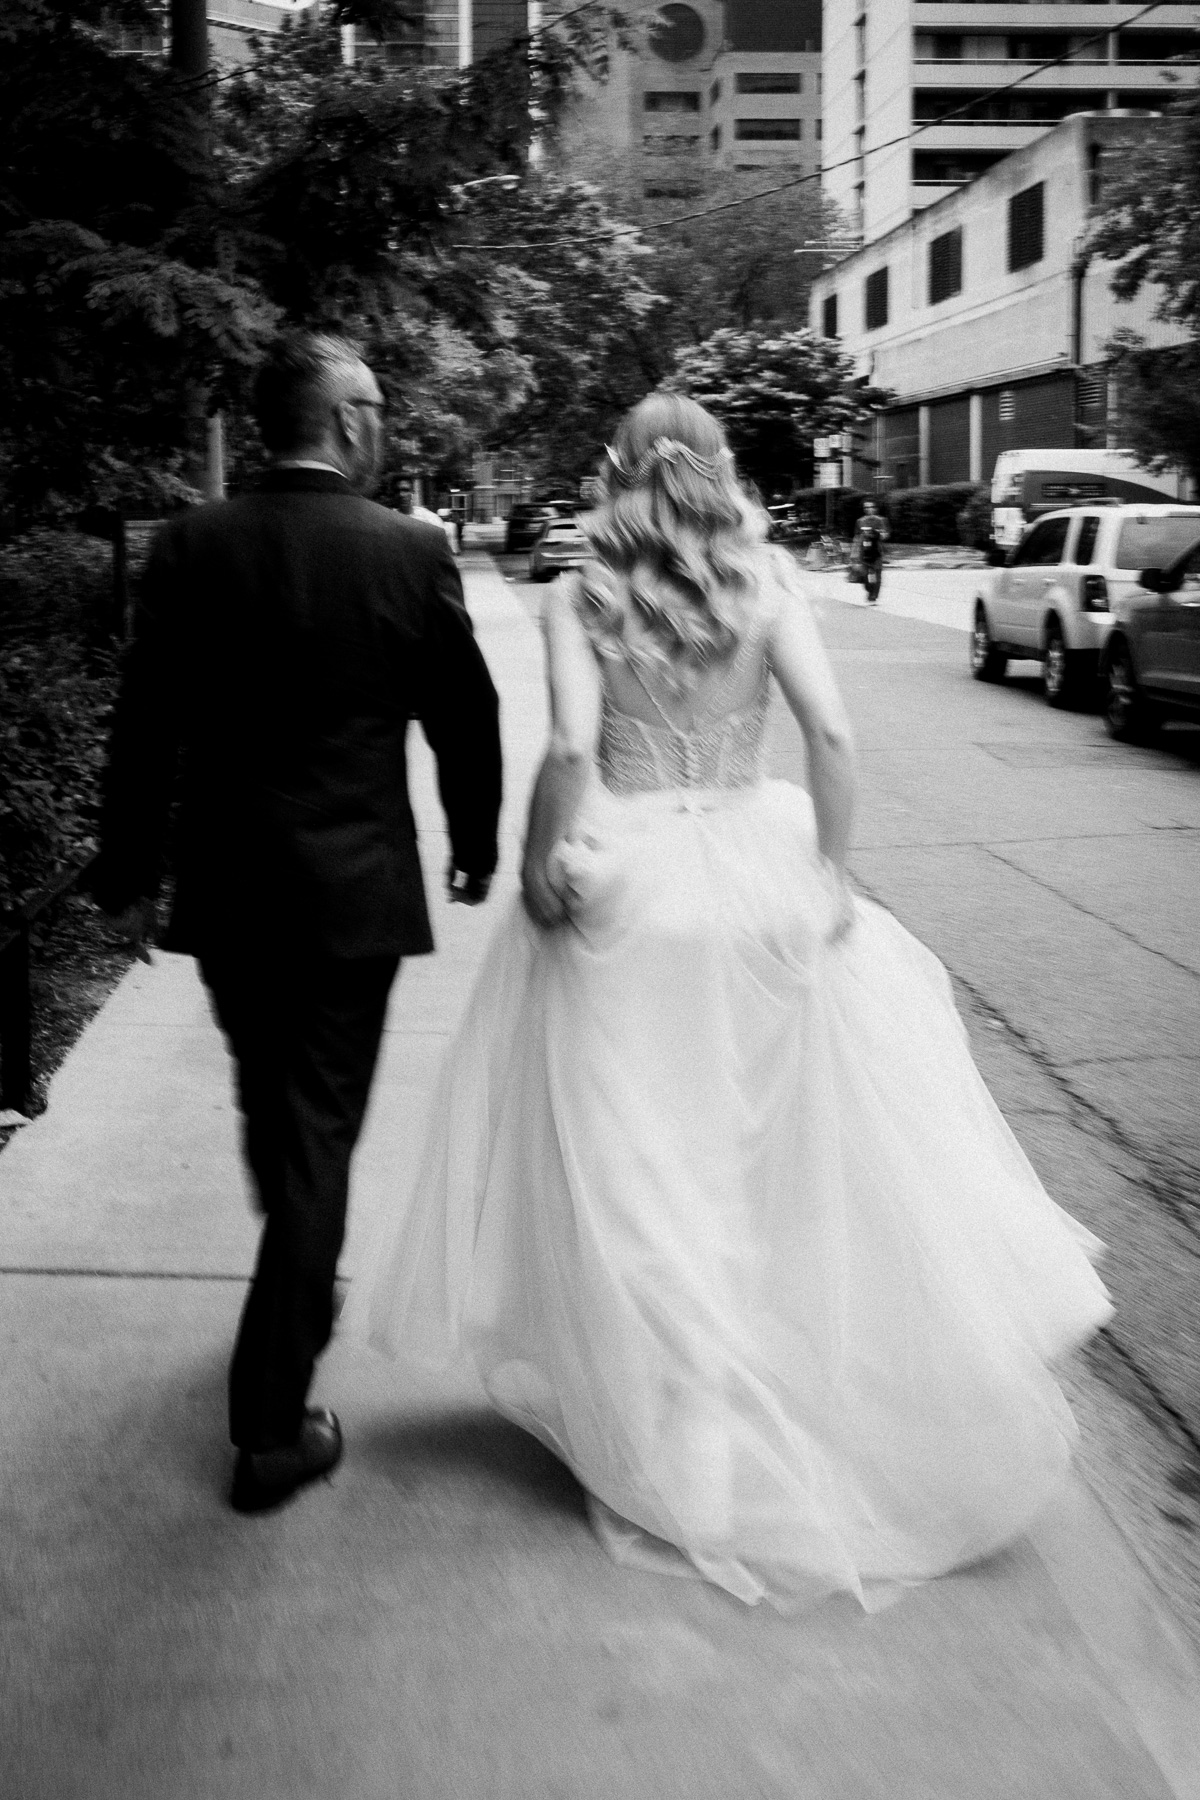 Behind the Lens: A Day in the Life of a Toronto Wedding Photographer